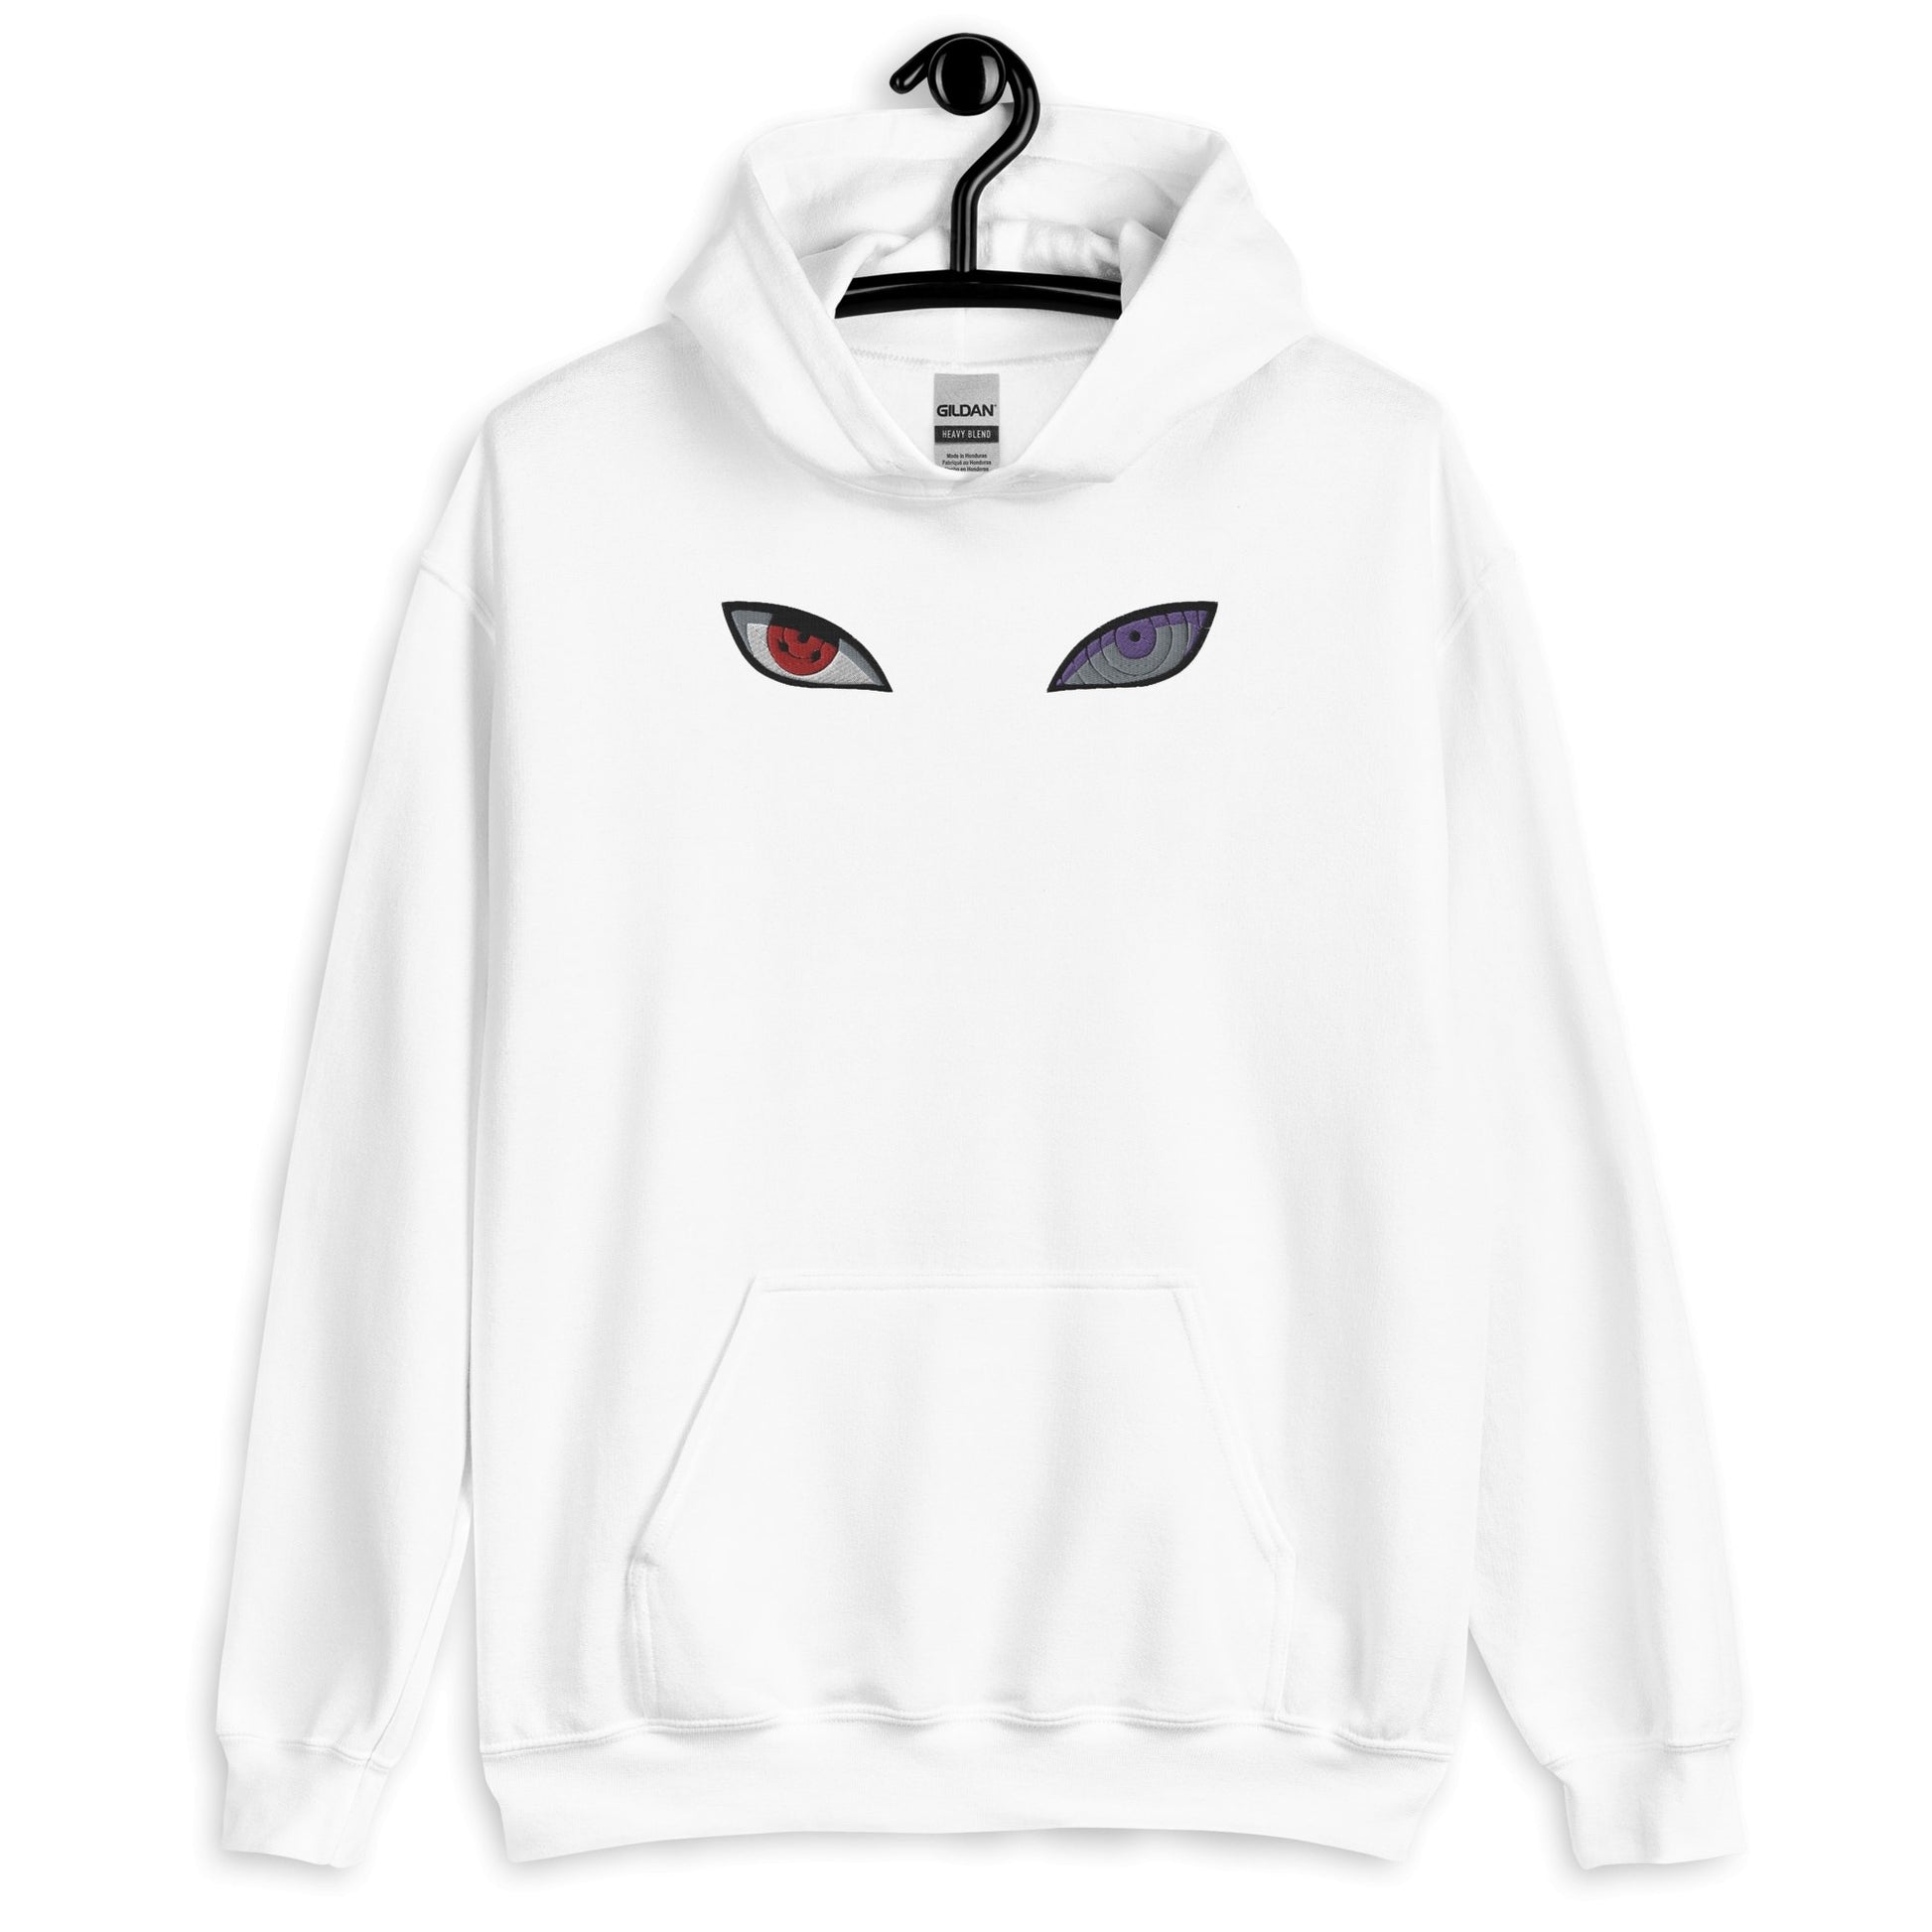 Embroidered Sasuke Eyes Naruto Anime Embroidered Hoodie - One Punch Fits